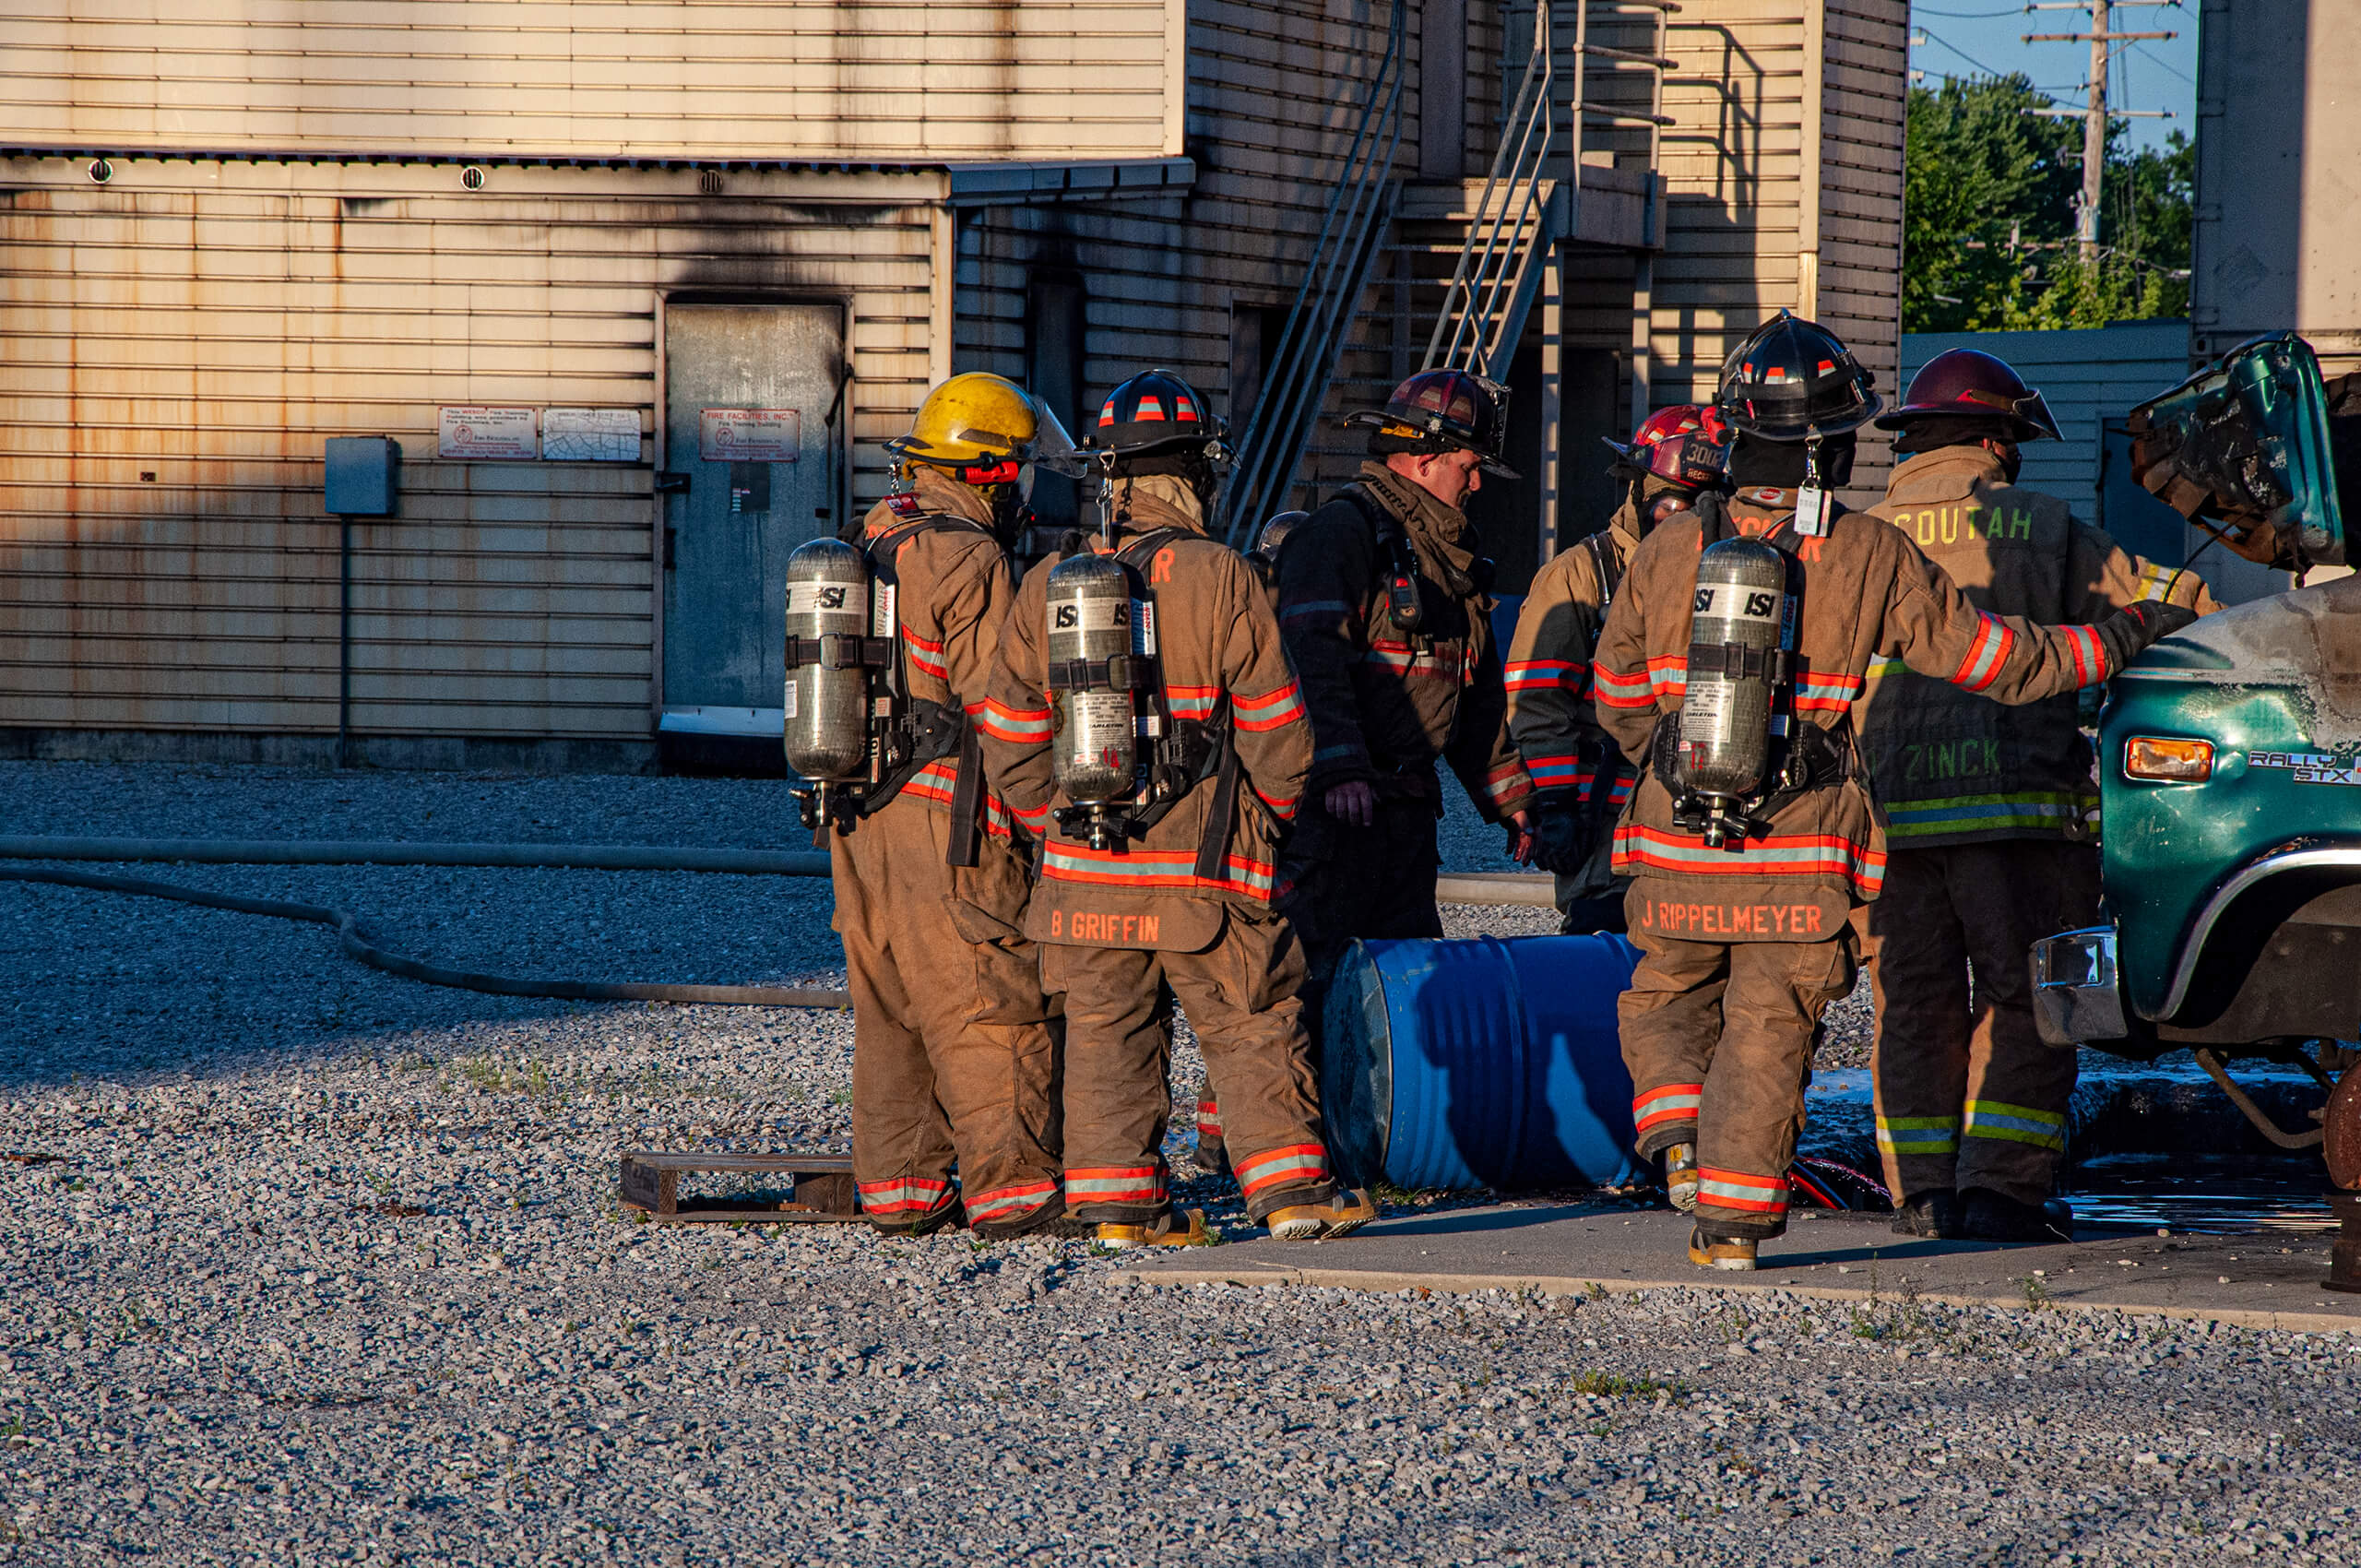 A group of firefighters preparing for a fire training exercise.